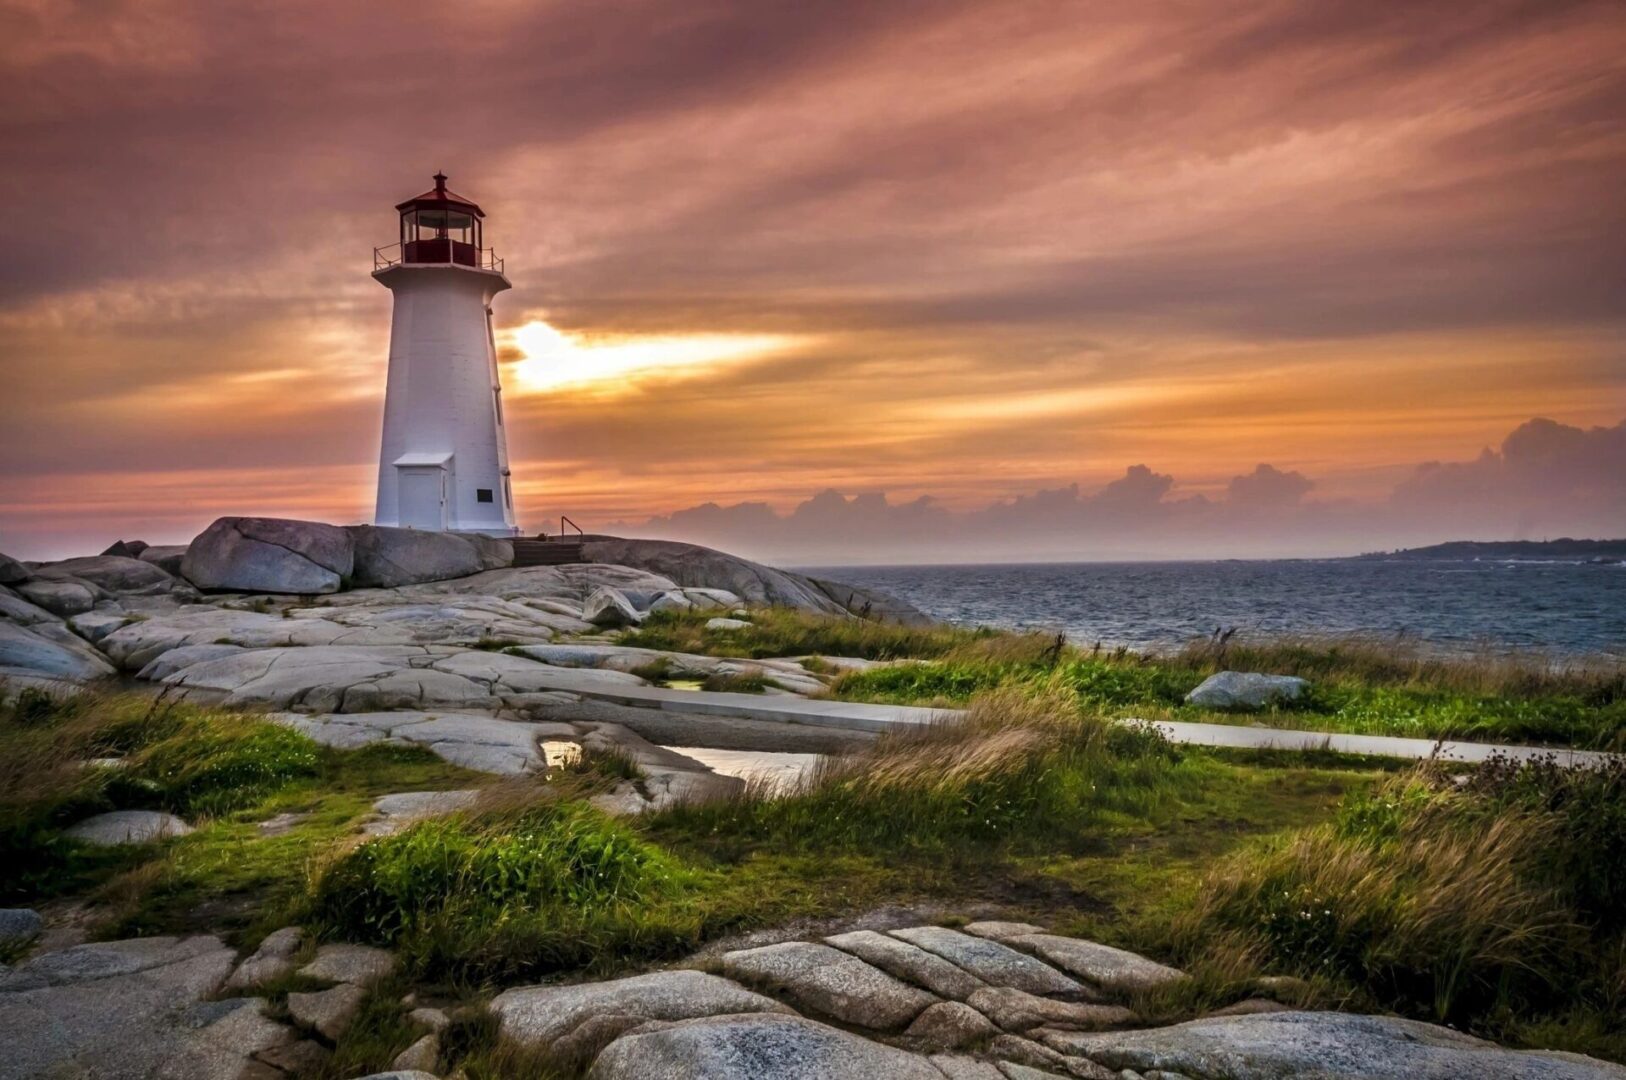 A lighthouse on the rocks at sunset.